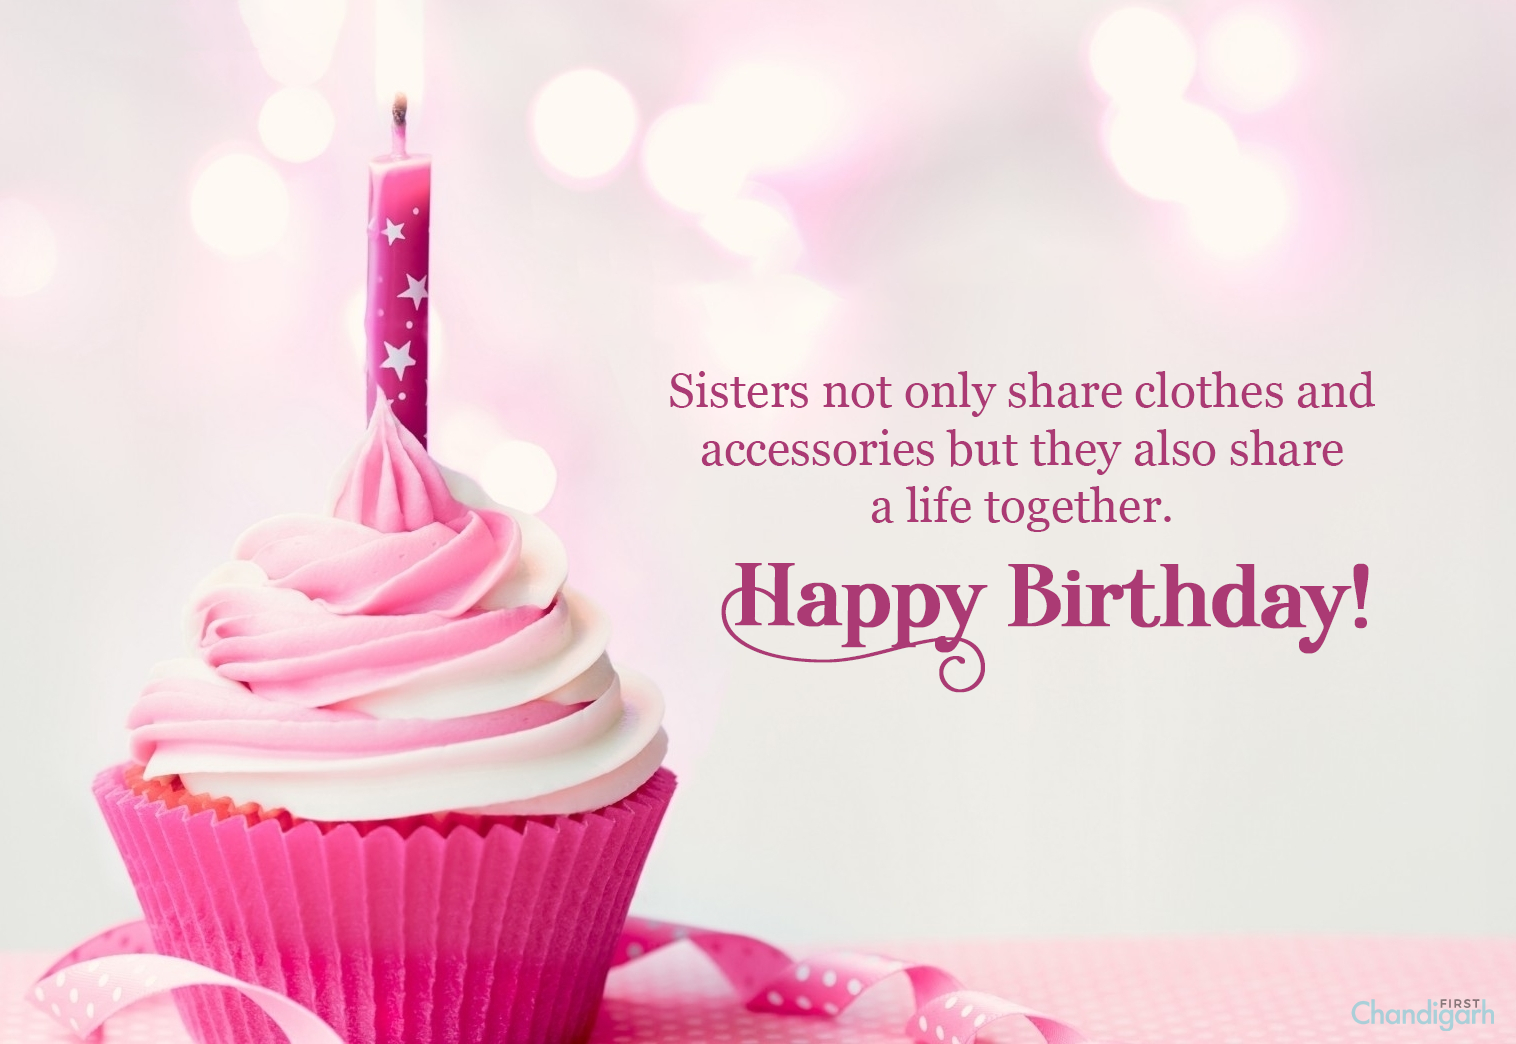 Wish Your Sister a Happy Birthday